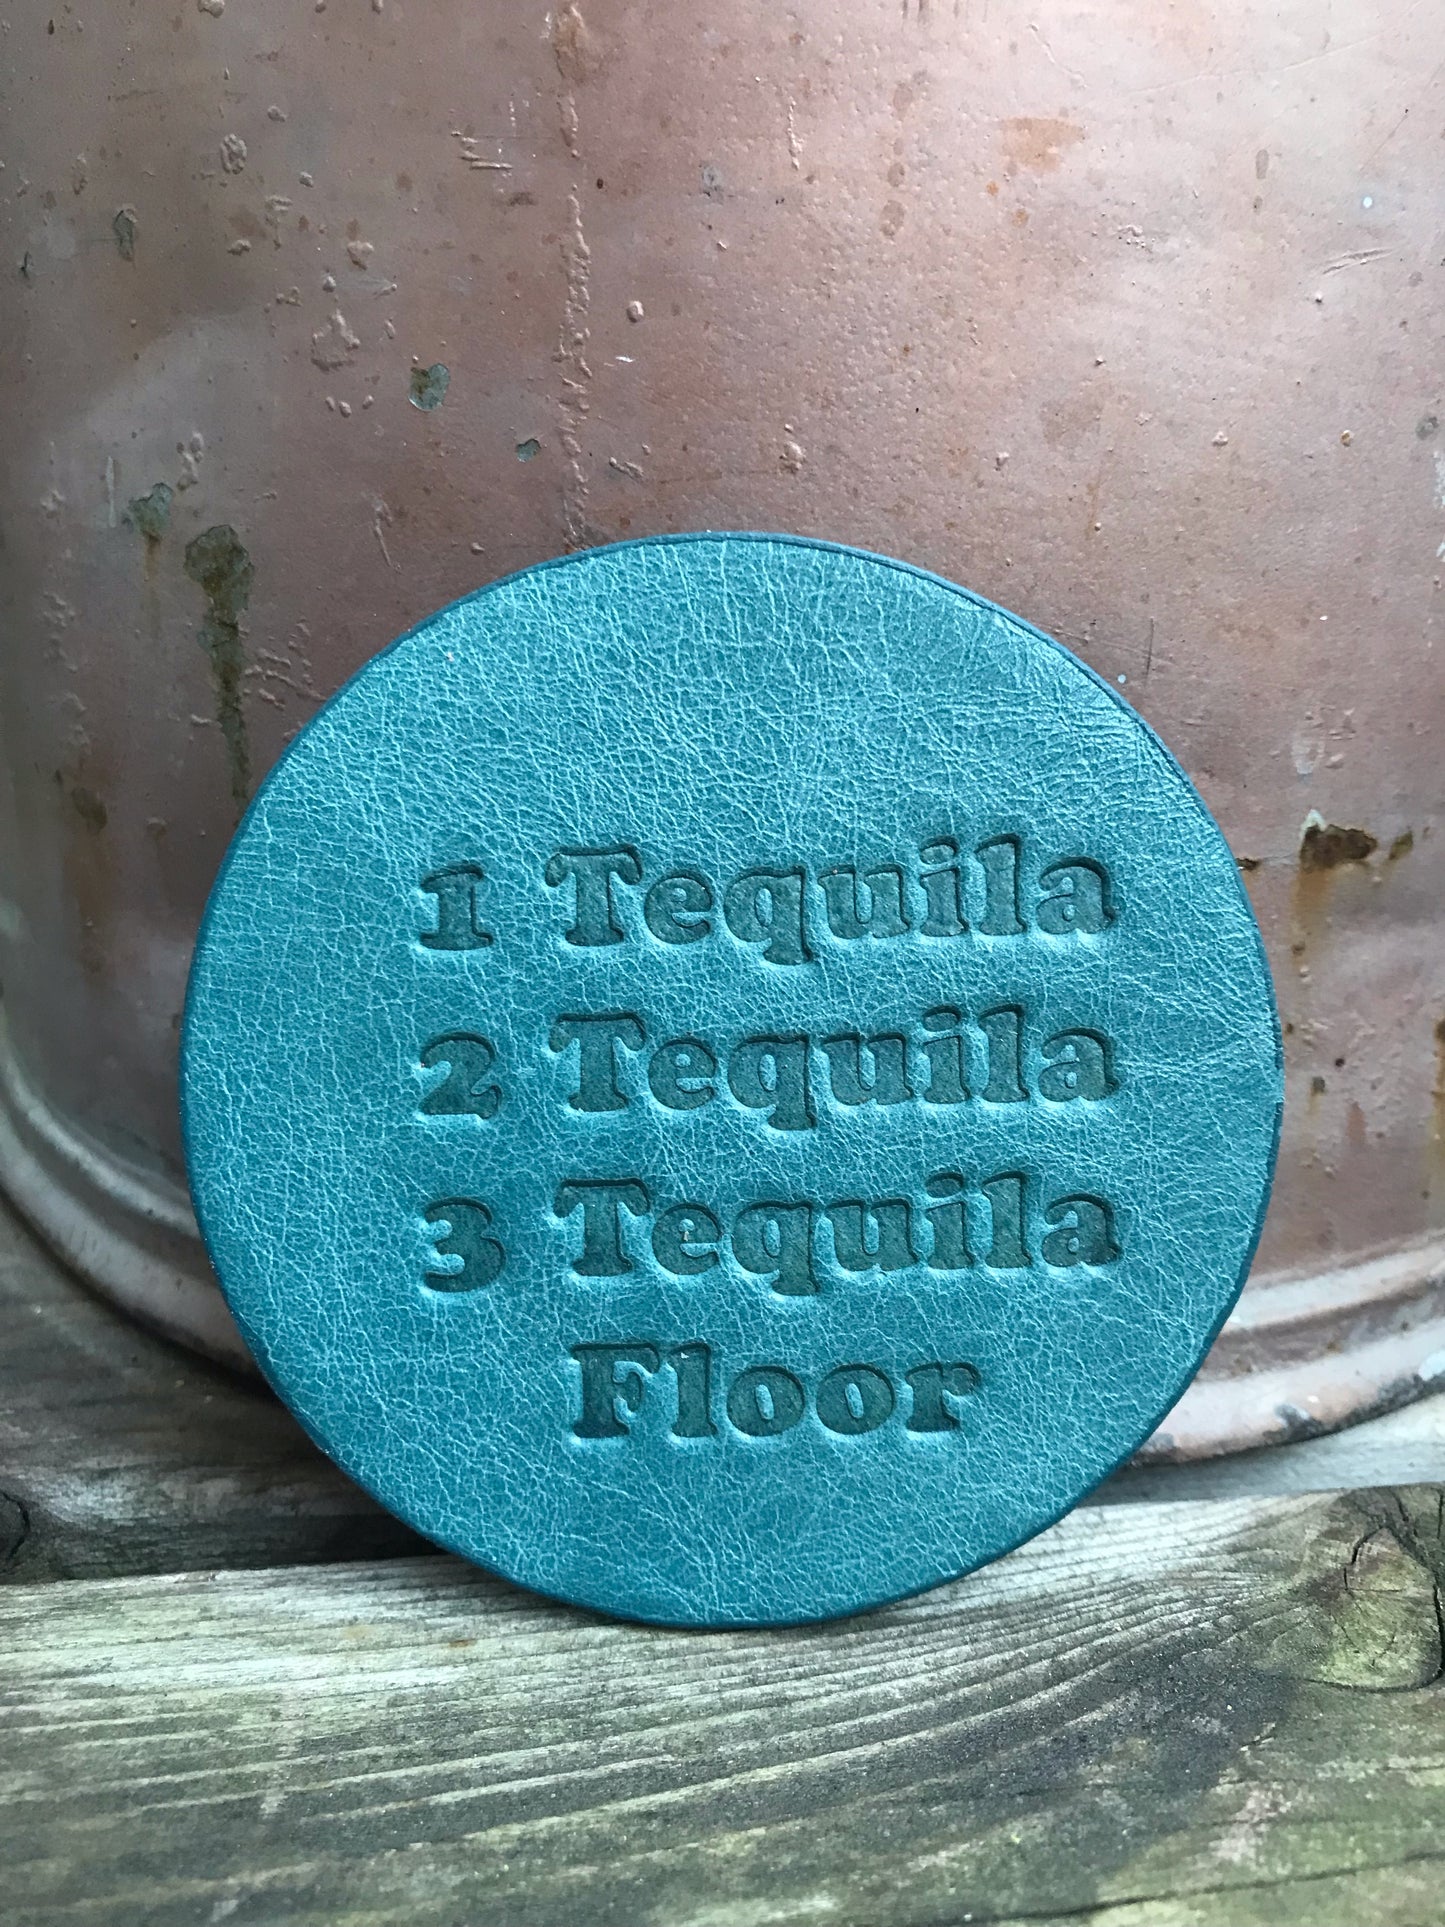 Leather Coaster - 1 Tequila 2 Tequila